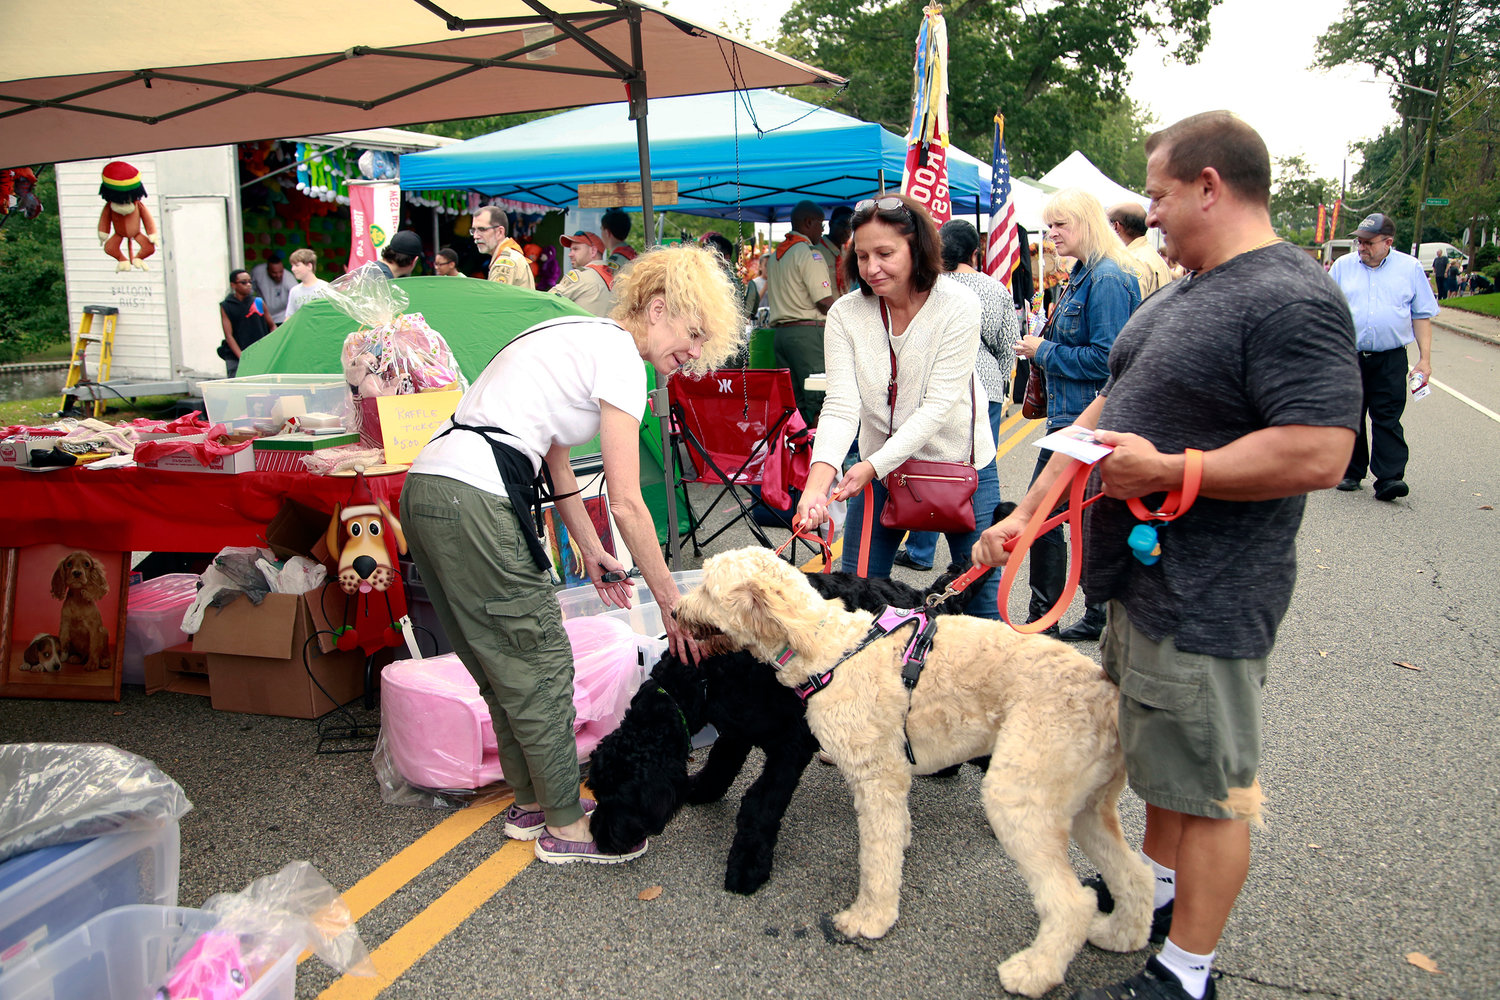 West Hempstead's annual Street Fair attracts all ages Herald